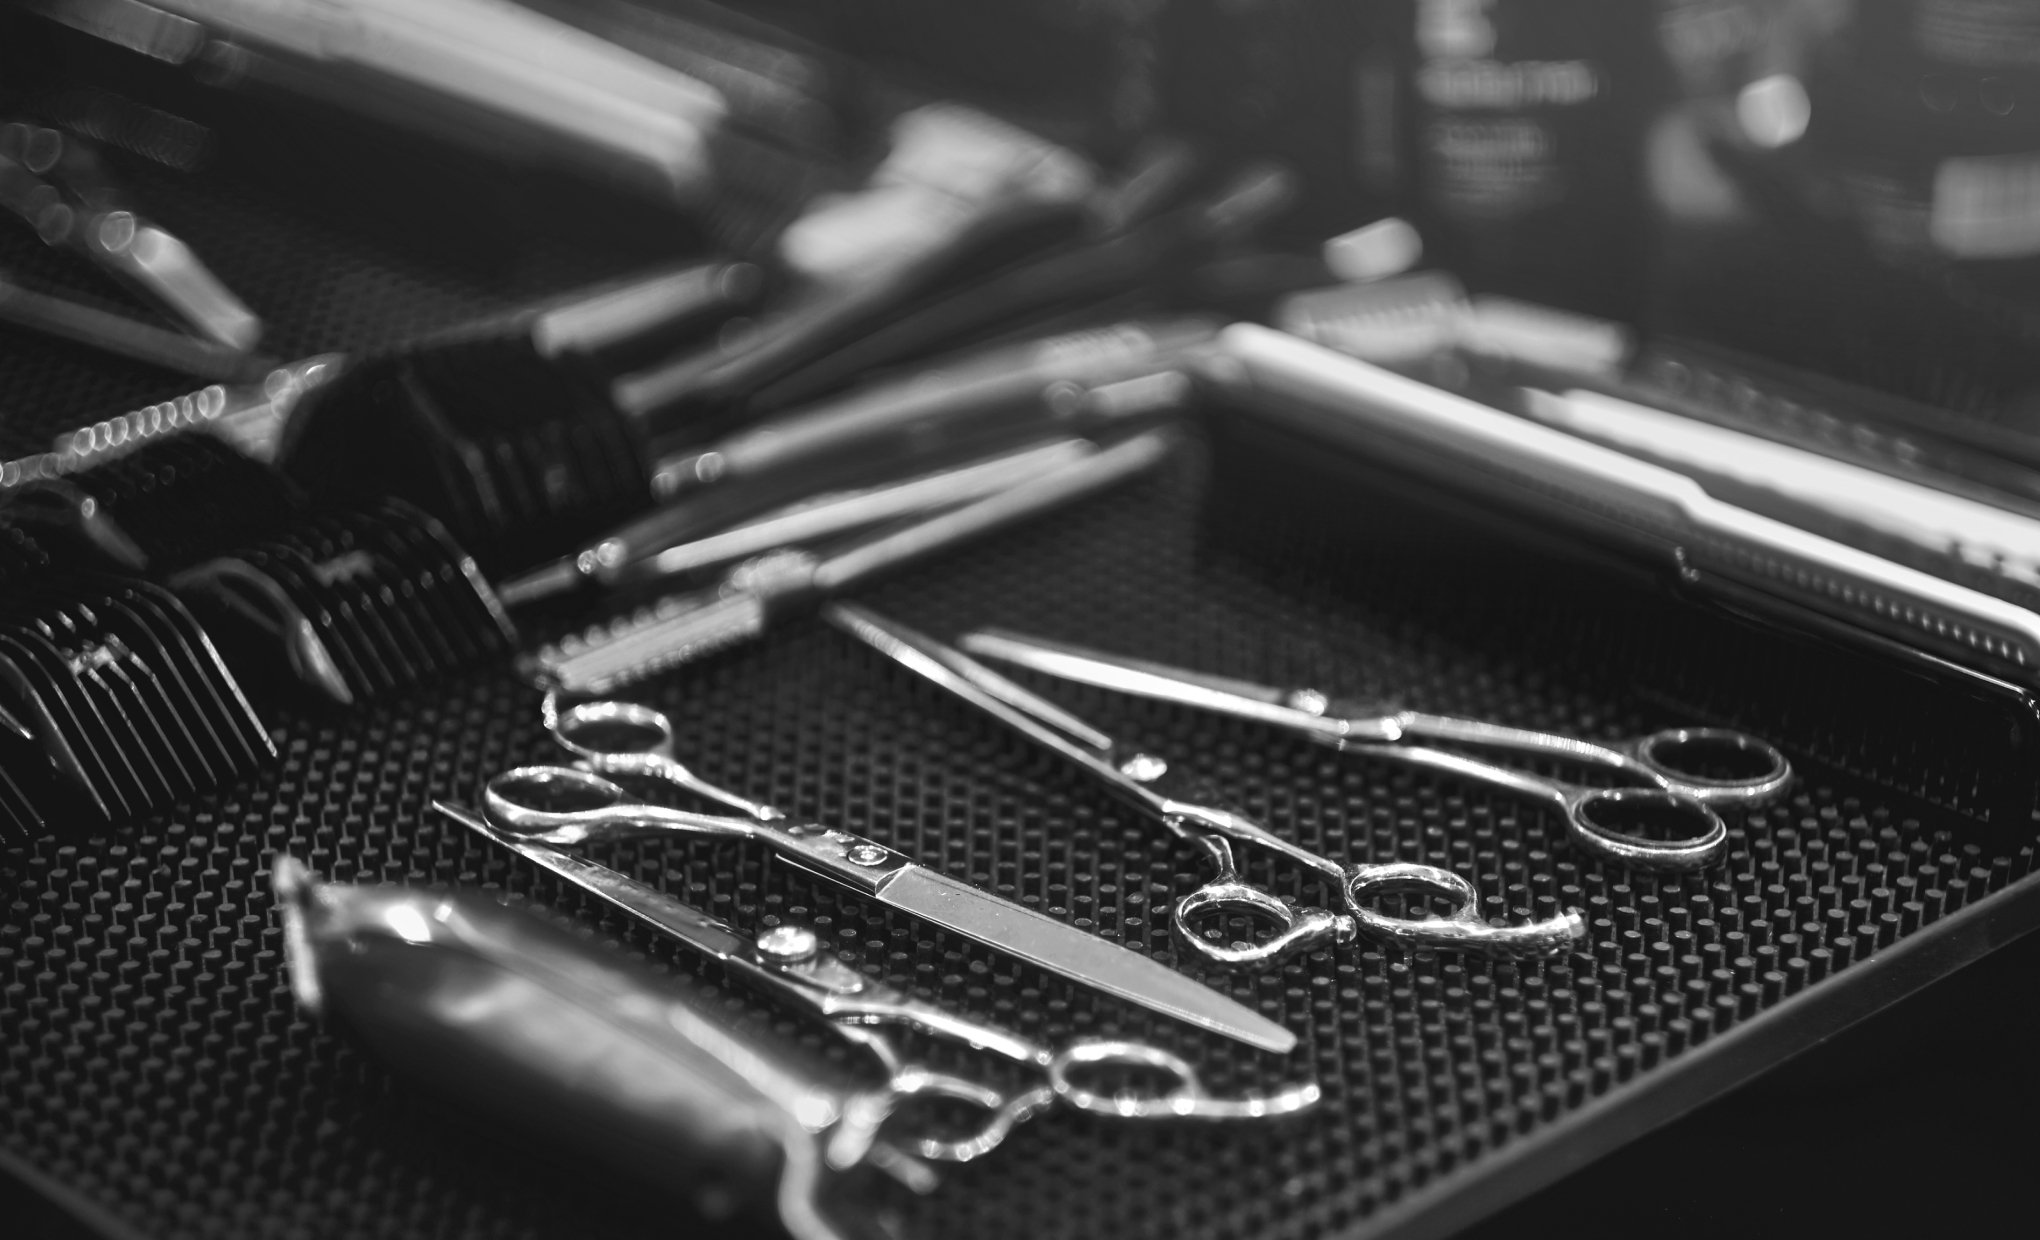 The History of Styling Shears